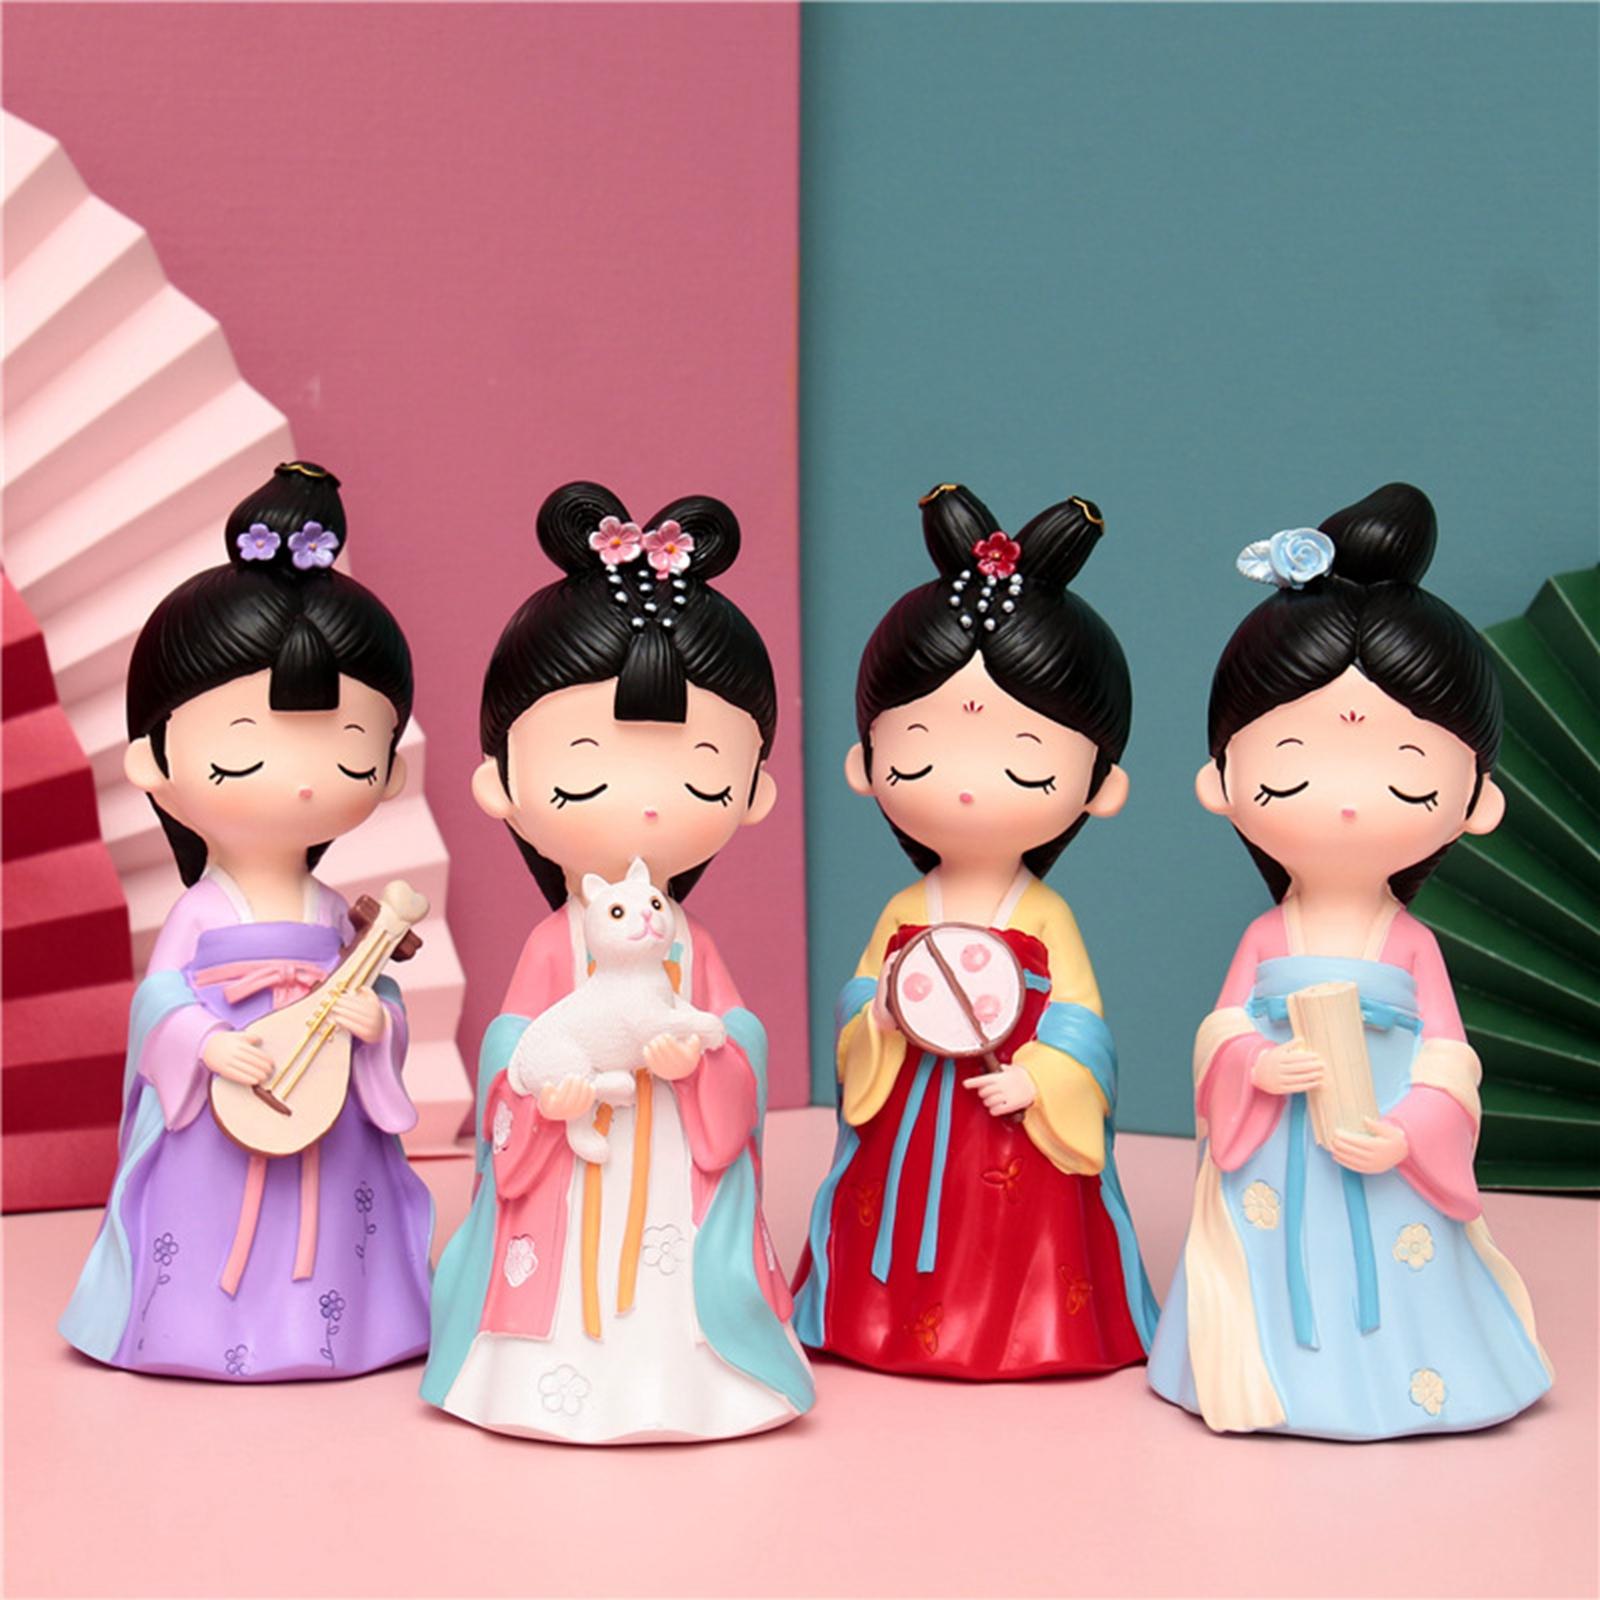 Ancient Chinese Girl Dolls Collectible Figurines Handicraft Girls Gift With Pipa